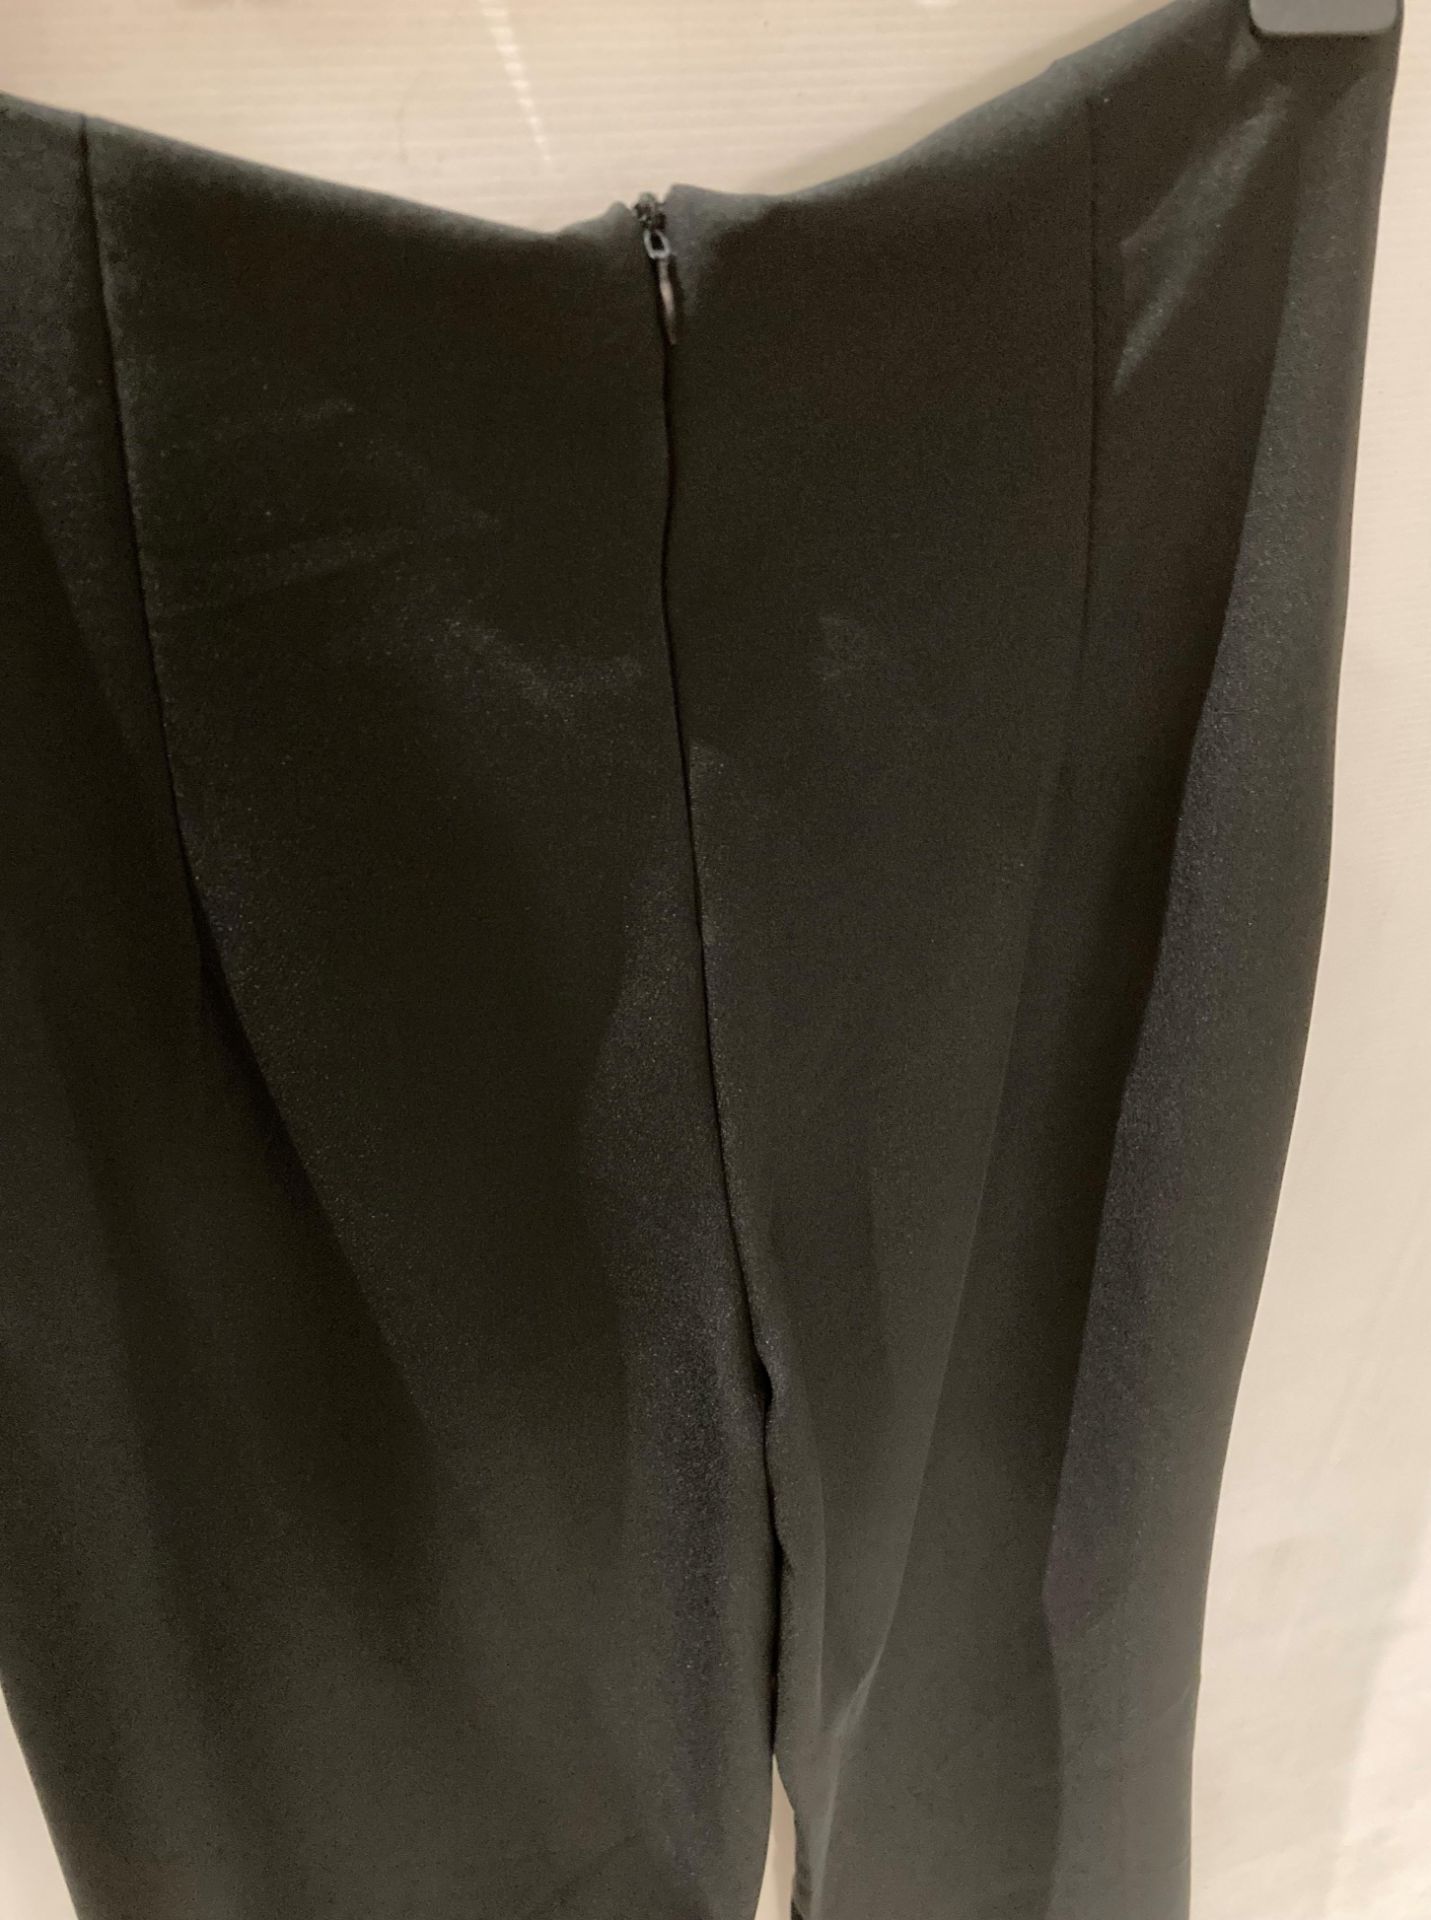 15 x New Collection black wide leg trousers with belt detail, sizes S, - Image 2 of 2